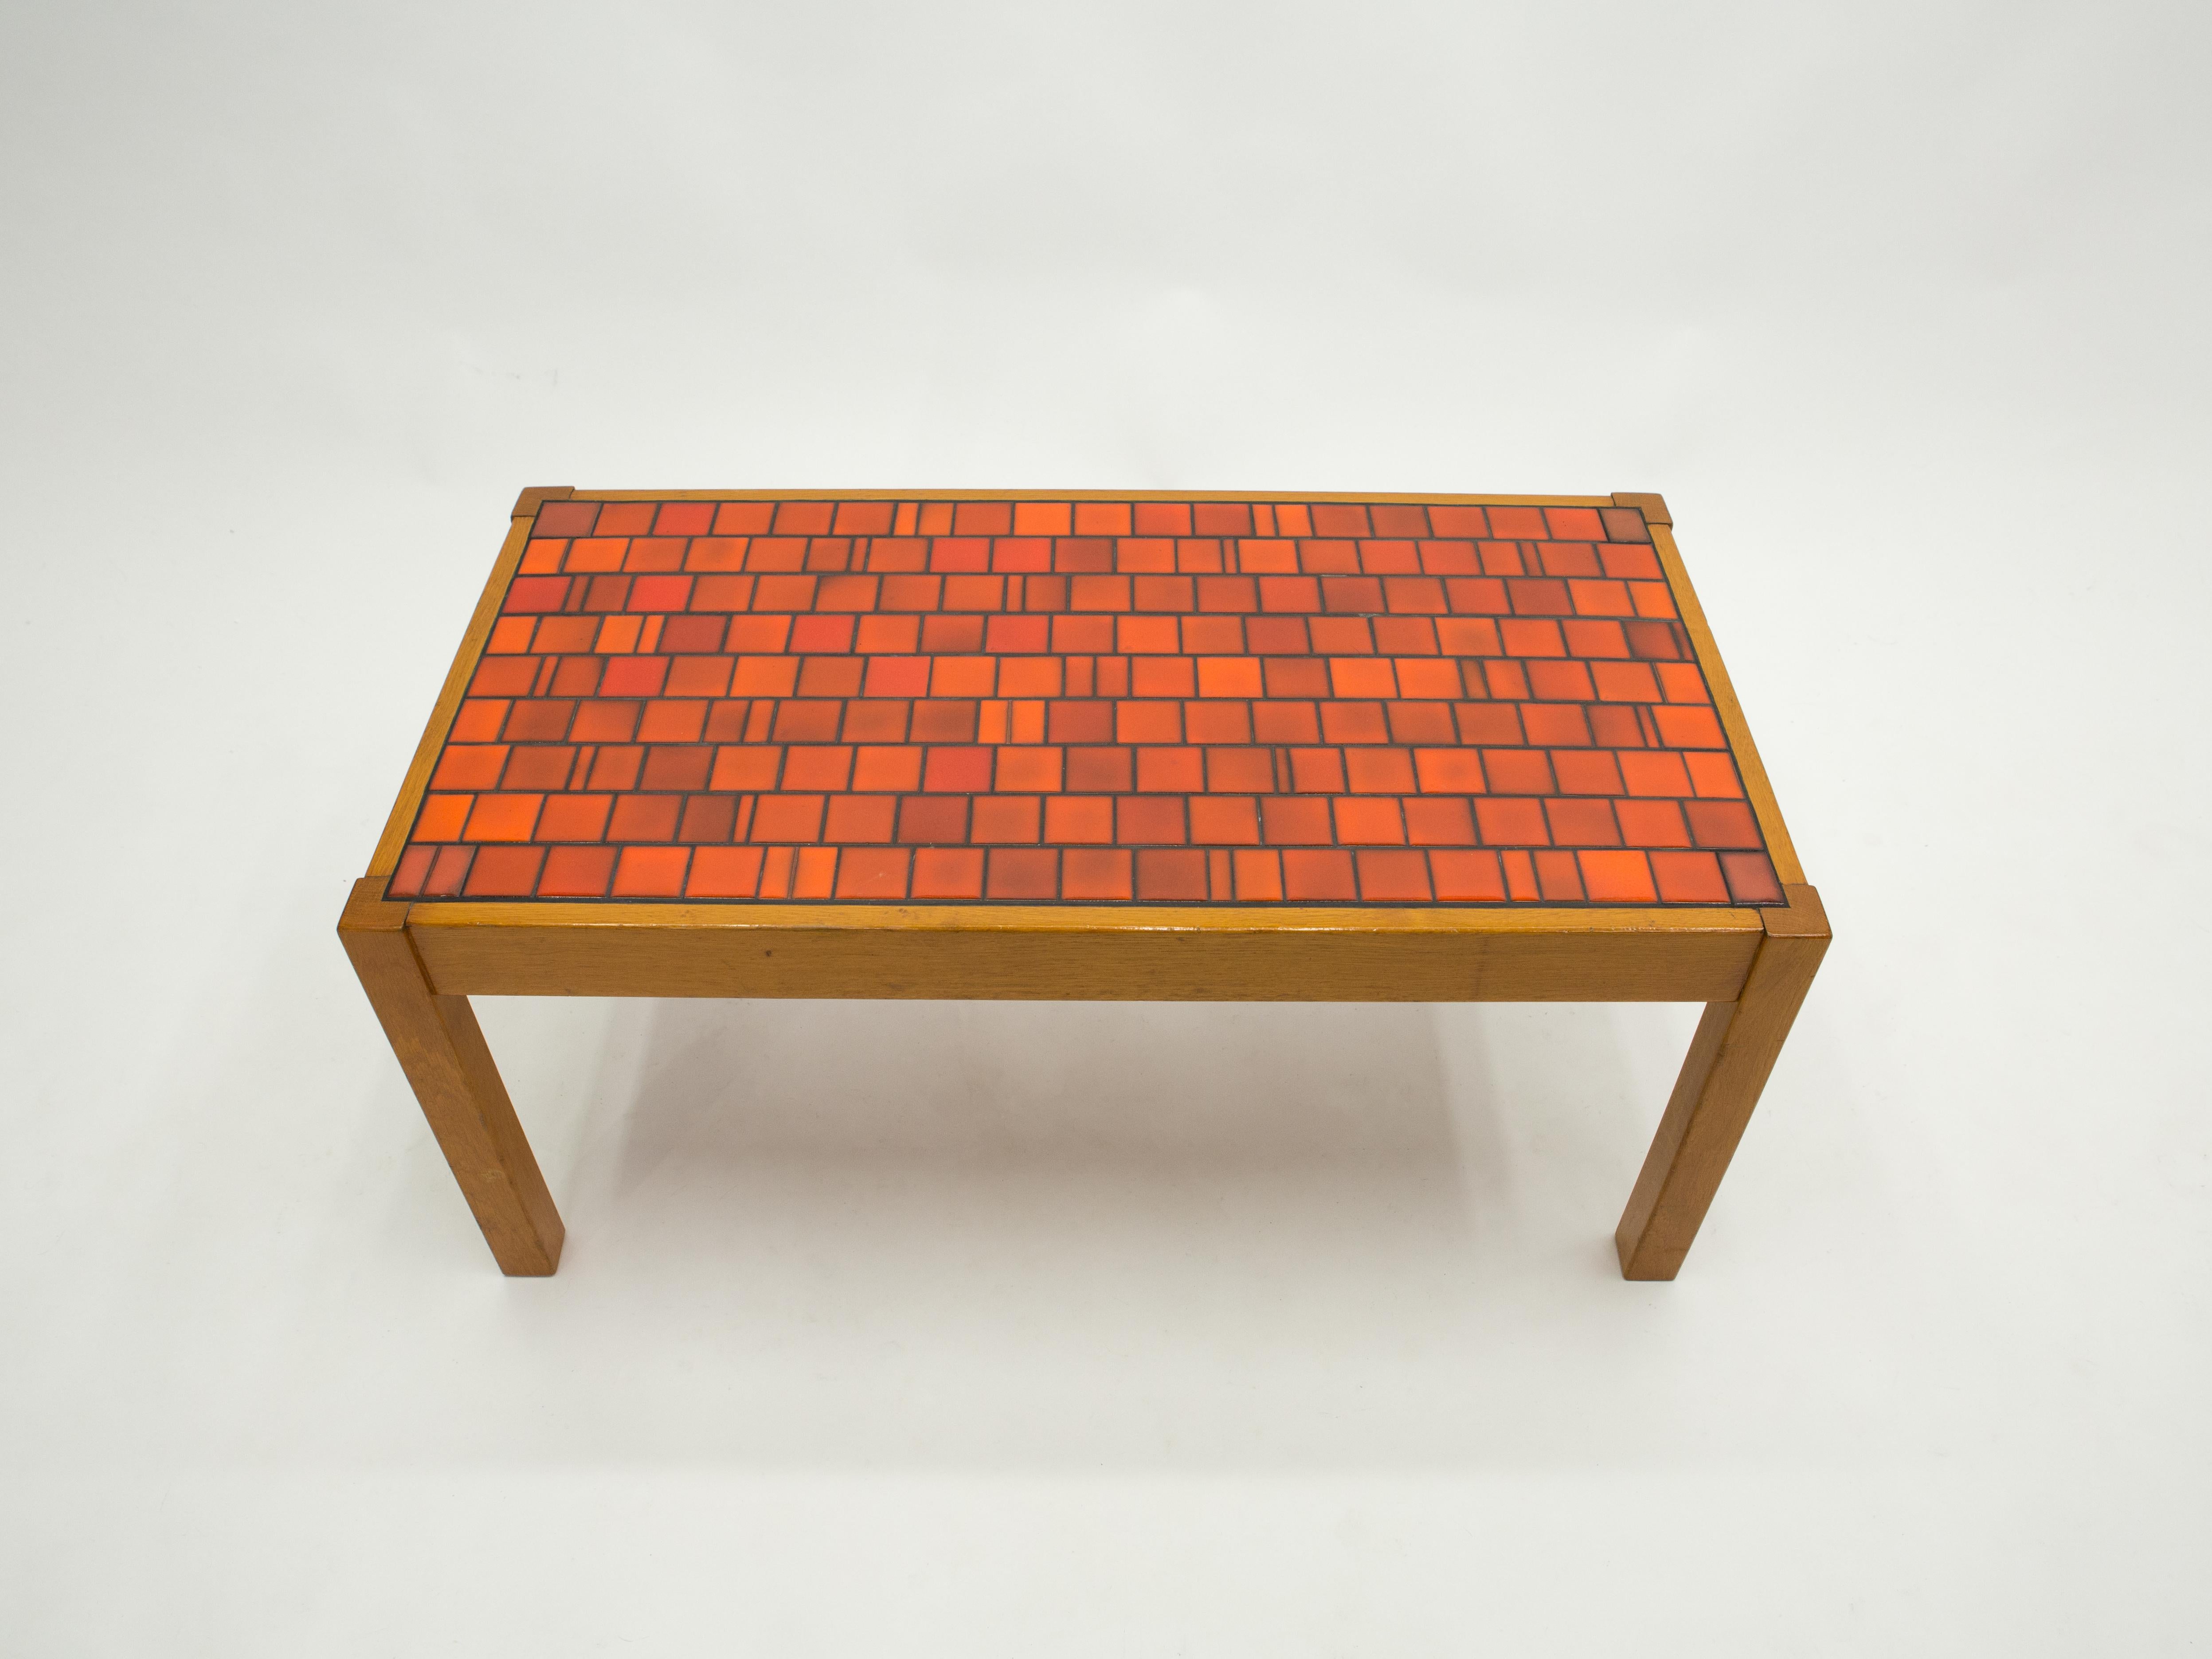 This beautiful French ceramic coffee table is typical 1960s, with its solid oak wood base and shades of red ceramic tales. The ceramic table surface explodes with warm color from rust red to hot orange, forming an eye-catching pattern across the